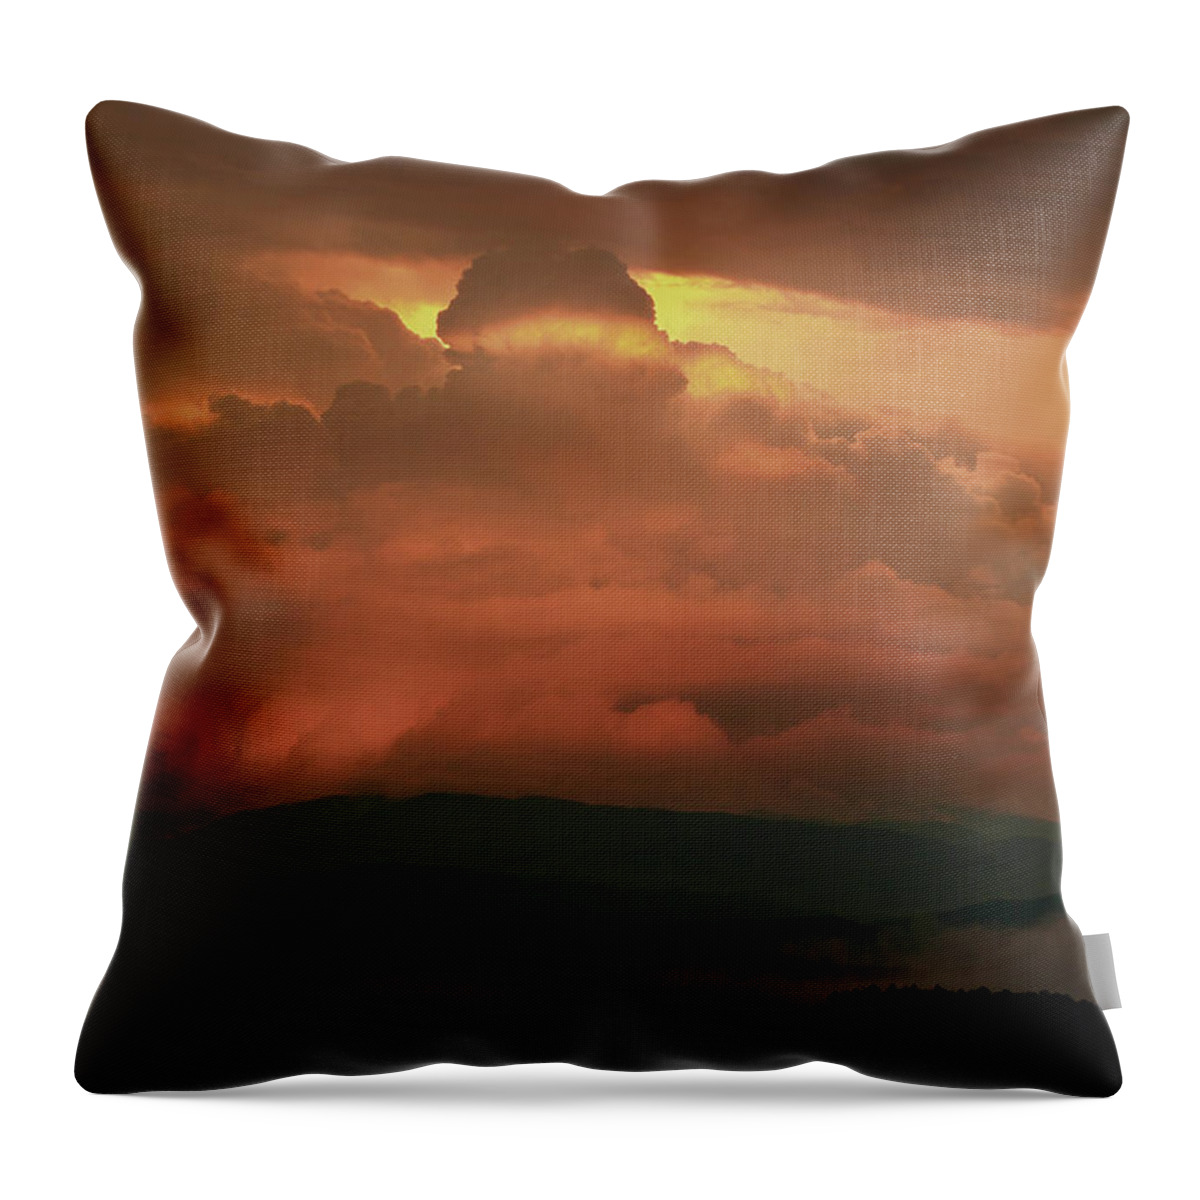 Smoky Mountains Storm Throw Pillow featuring the photograph Storm Over The Smokies 2 by Michael Eingle